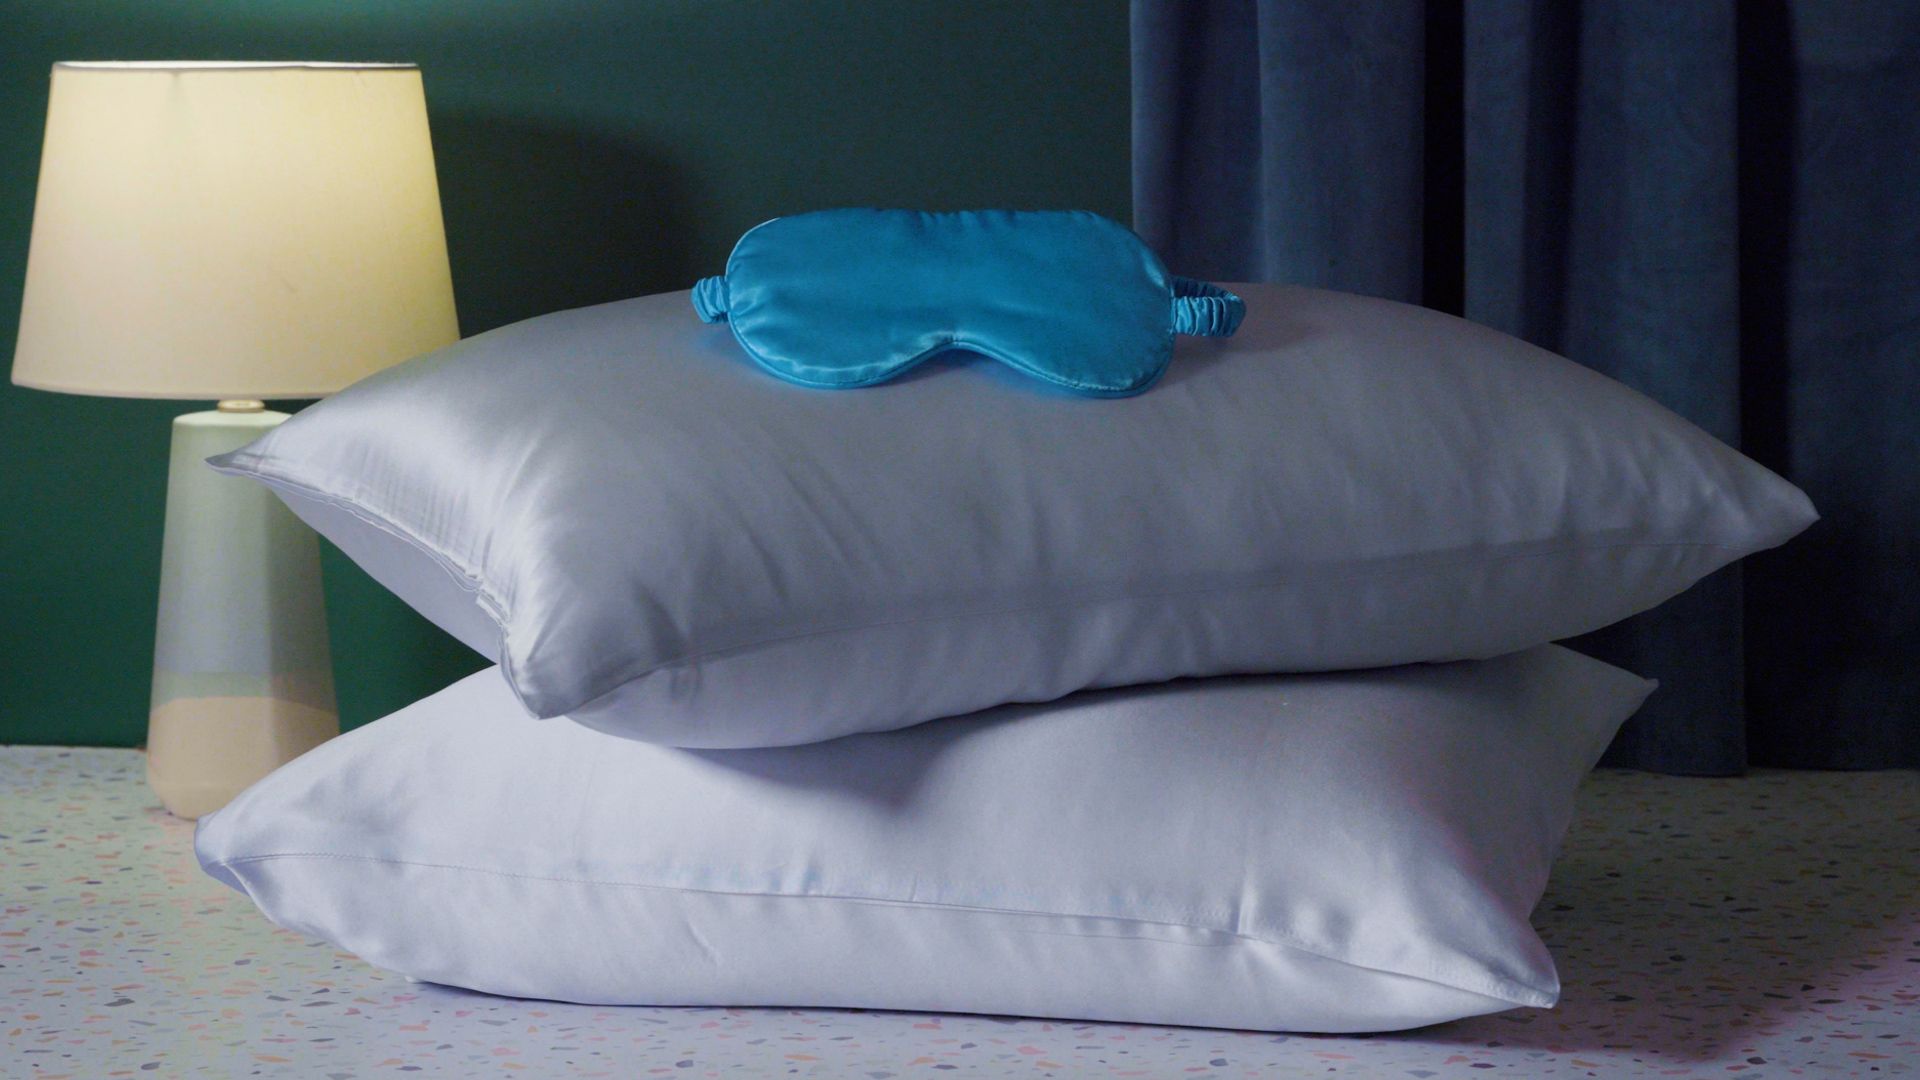 Cleaning Experts Say This Is How To Stop Pillowcases From Turning Yellow